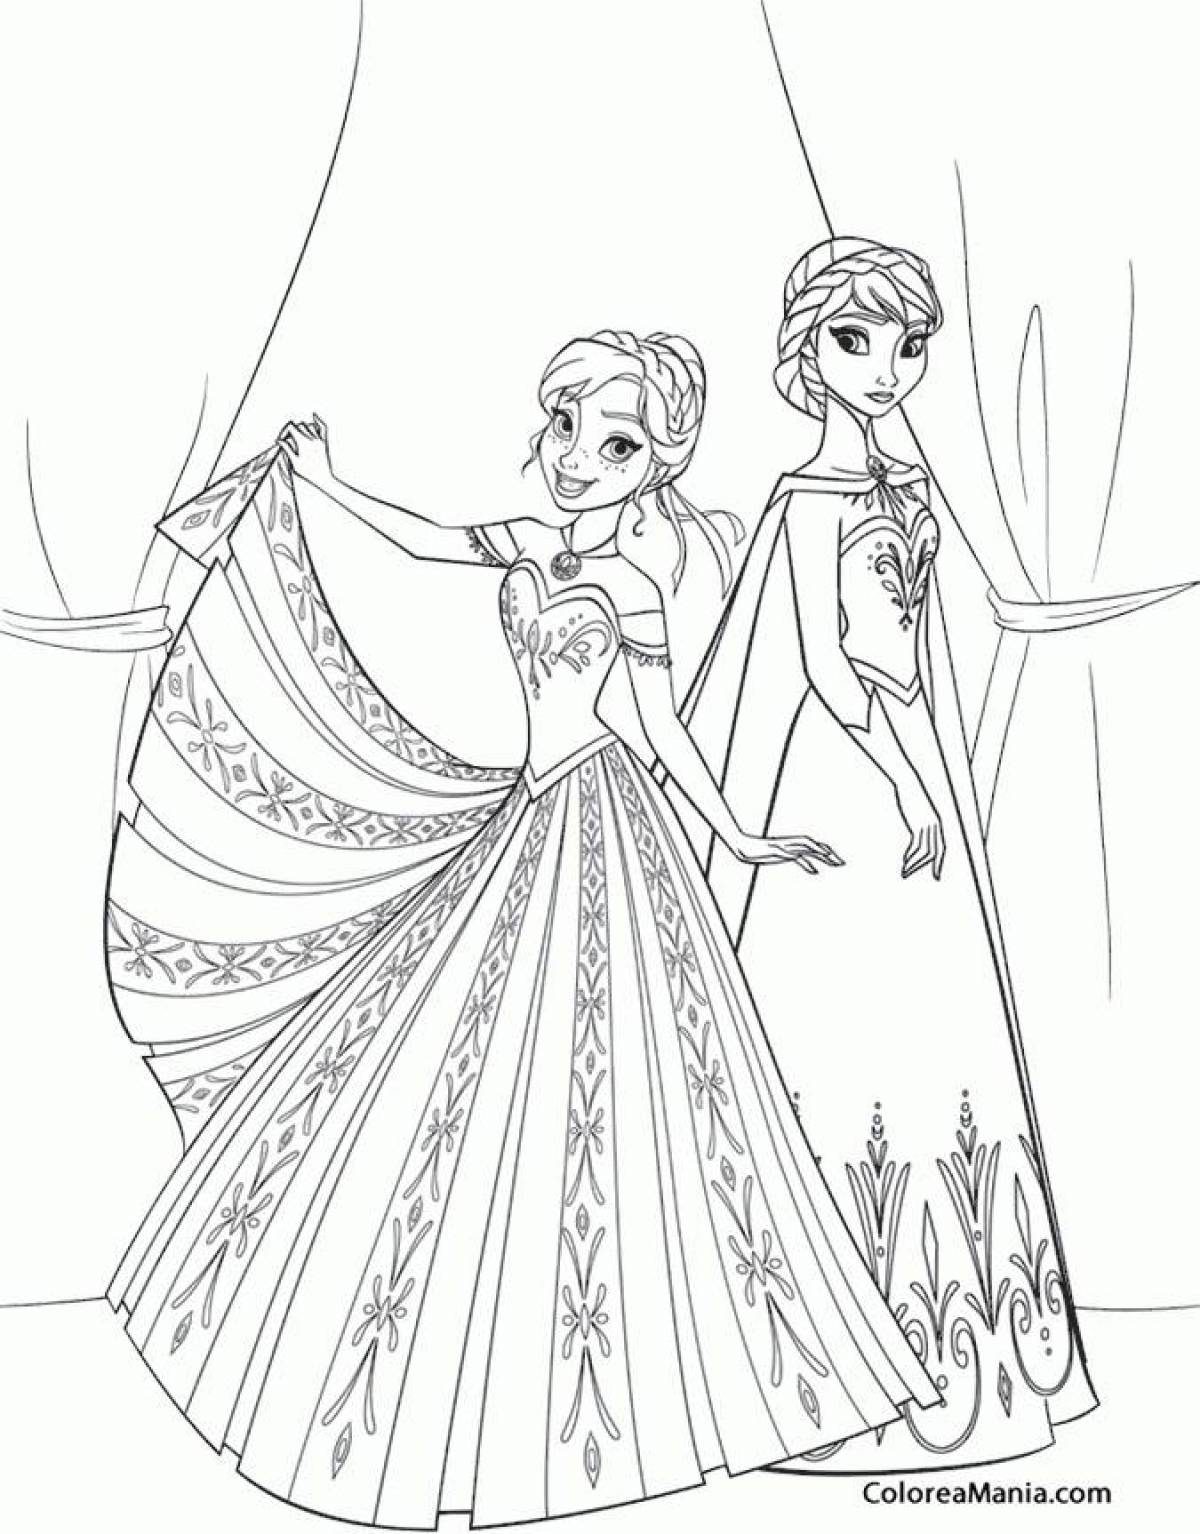 Elsa and Anna Frozen's wonderful coloring book